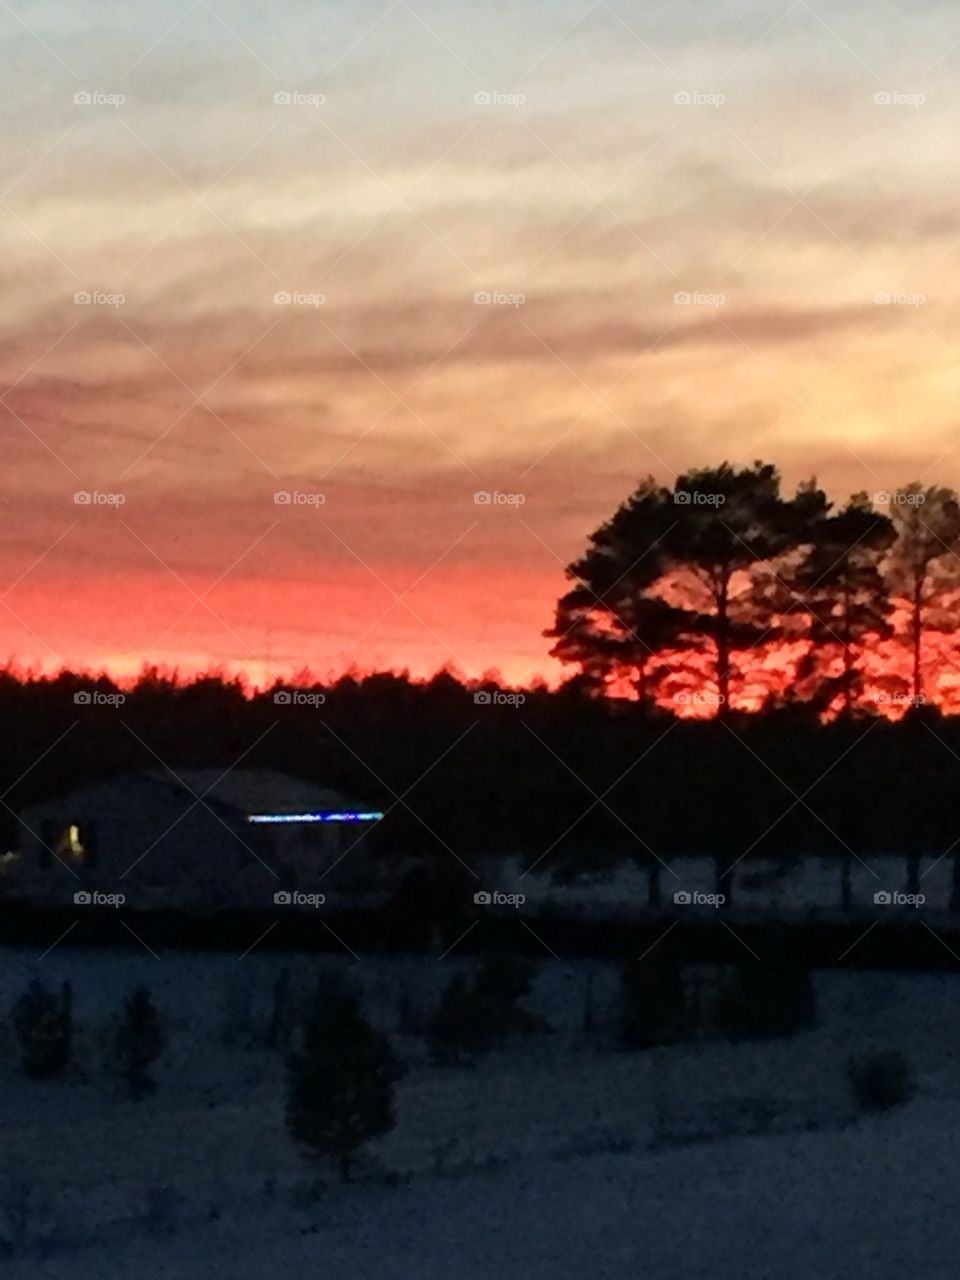 Beautiful sunset in the Northern skies December 15 the beautiful orange glow and down below Christmas lights Glowing in the dark